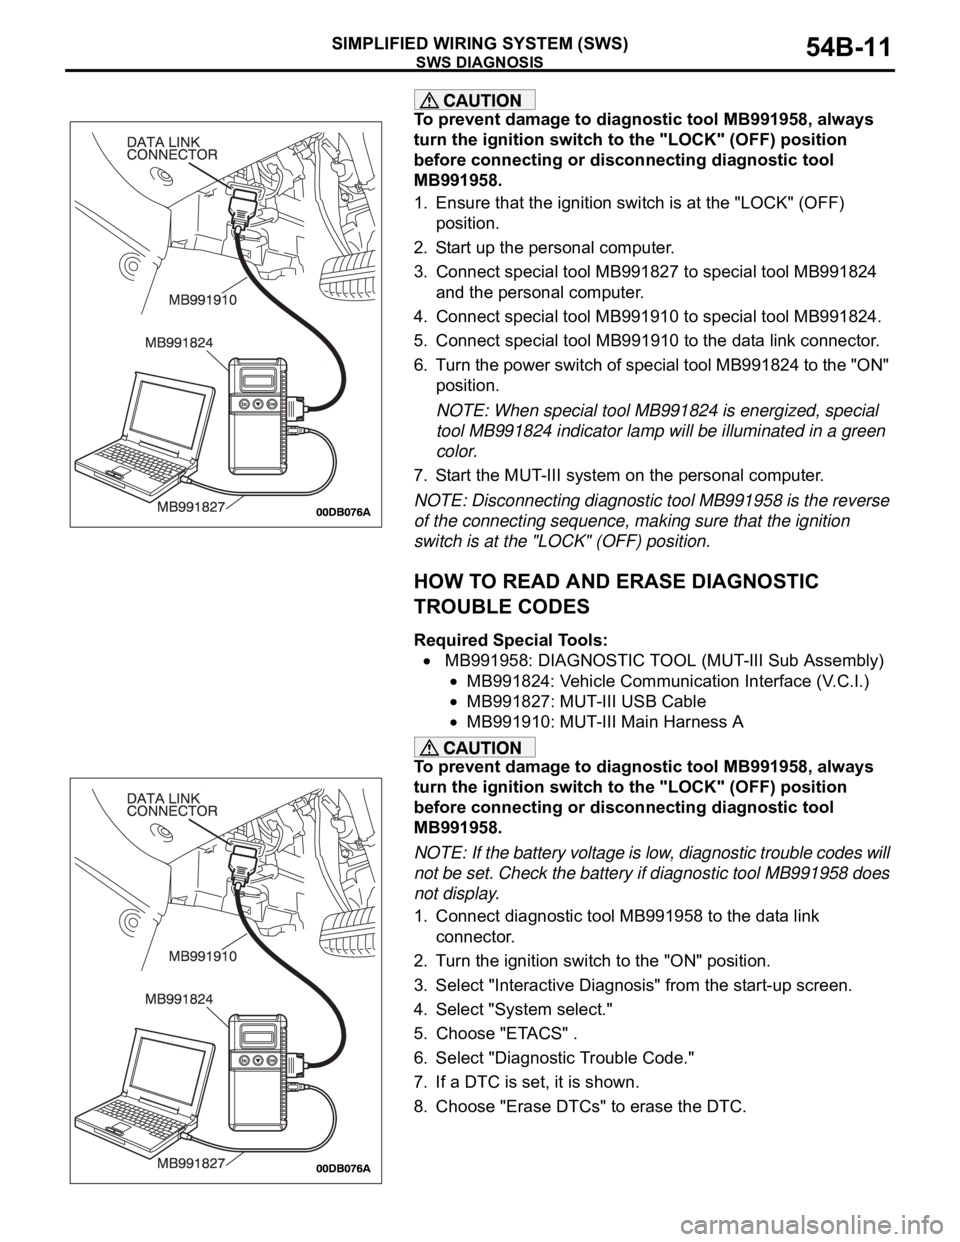 MITSUBISHI 380 2005  Workshop Manual SWS DIAGNOSIS
SIMPLIFIED WIRING SYSTEM (SWS)54B-11
To prevent damage to diagnostic tool MB991958, always 
turn the ignition switch to the "LOCK" (OFF) position 
before connecting or disconnect